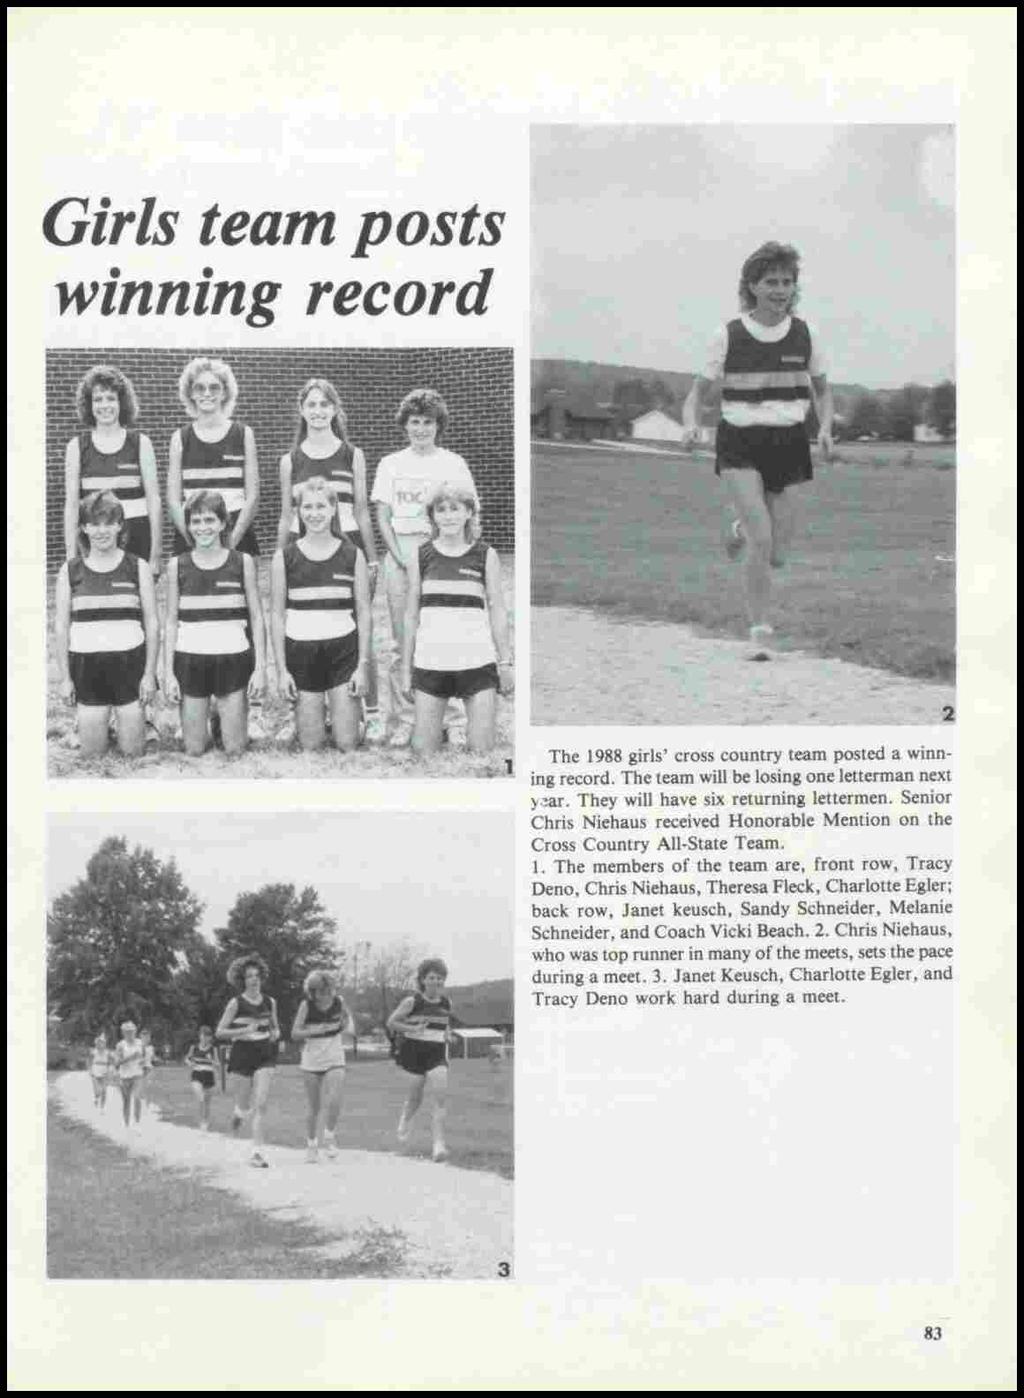 Girls team posts winning record The 1988 girls' cross country team posted a winning record. The team will be losing one letterman next y.'!ar. They will have six returning lettermen.